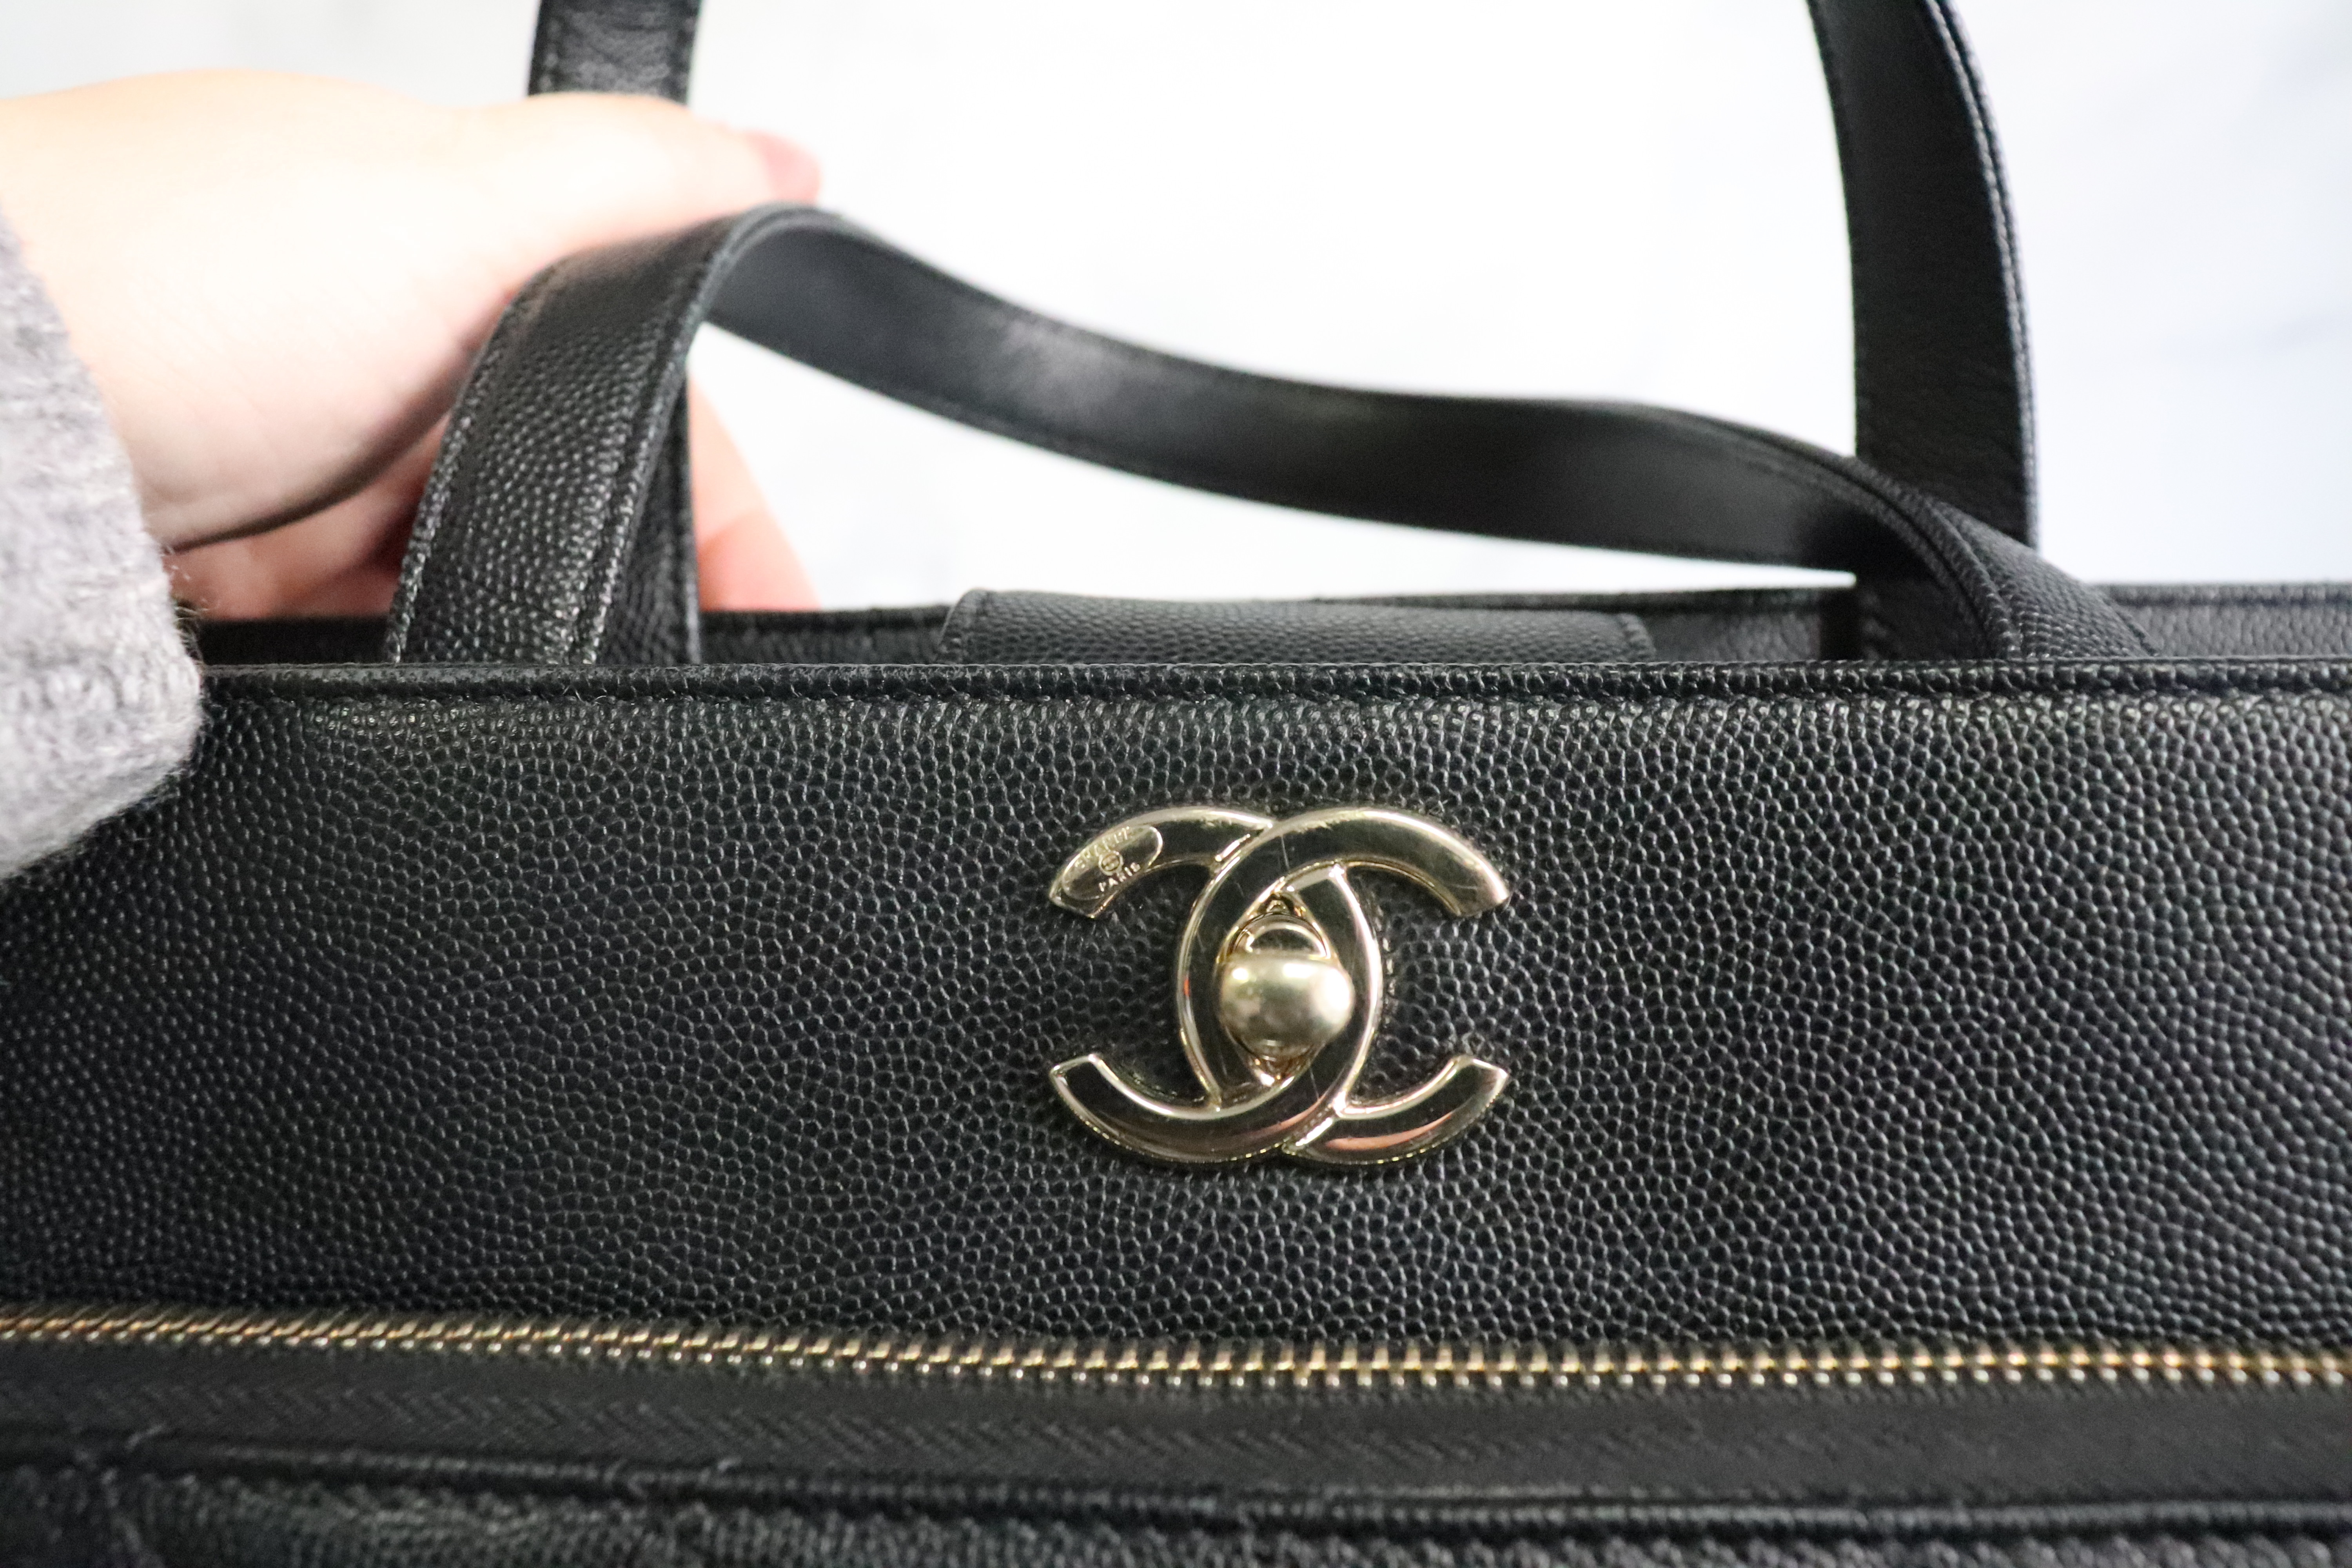 Superb Chanel Classic Business Affinity shopping bag in petrol